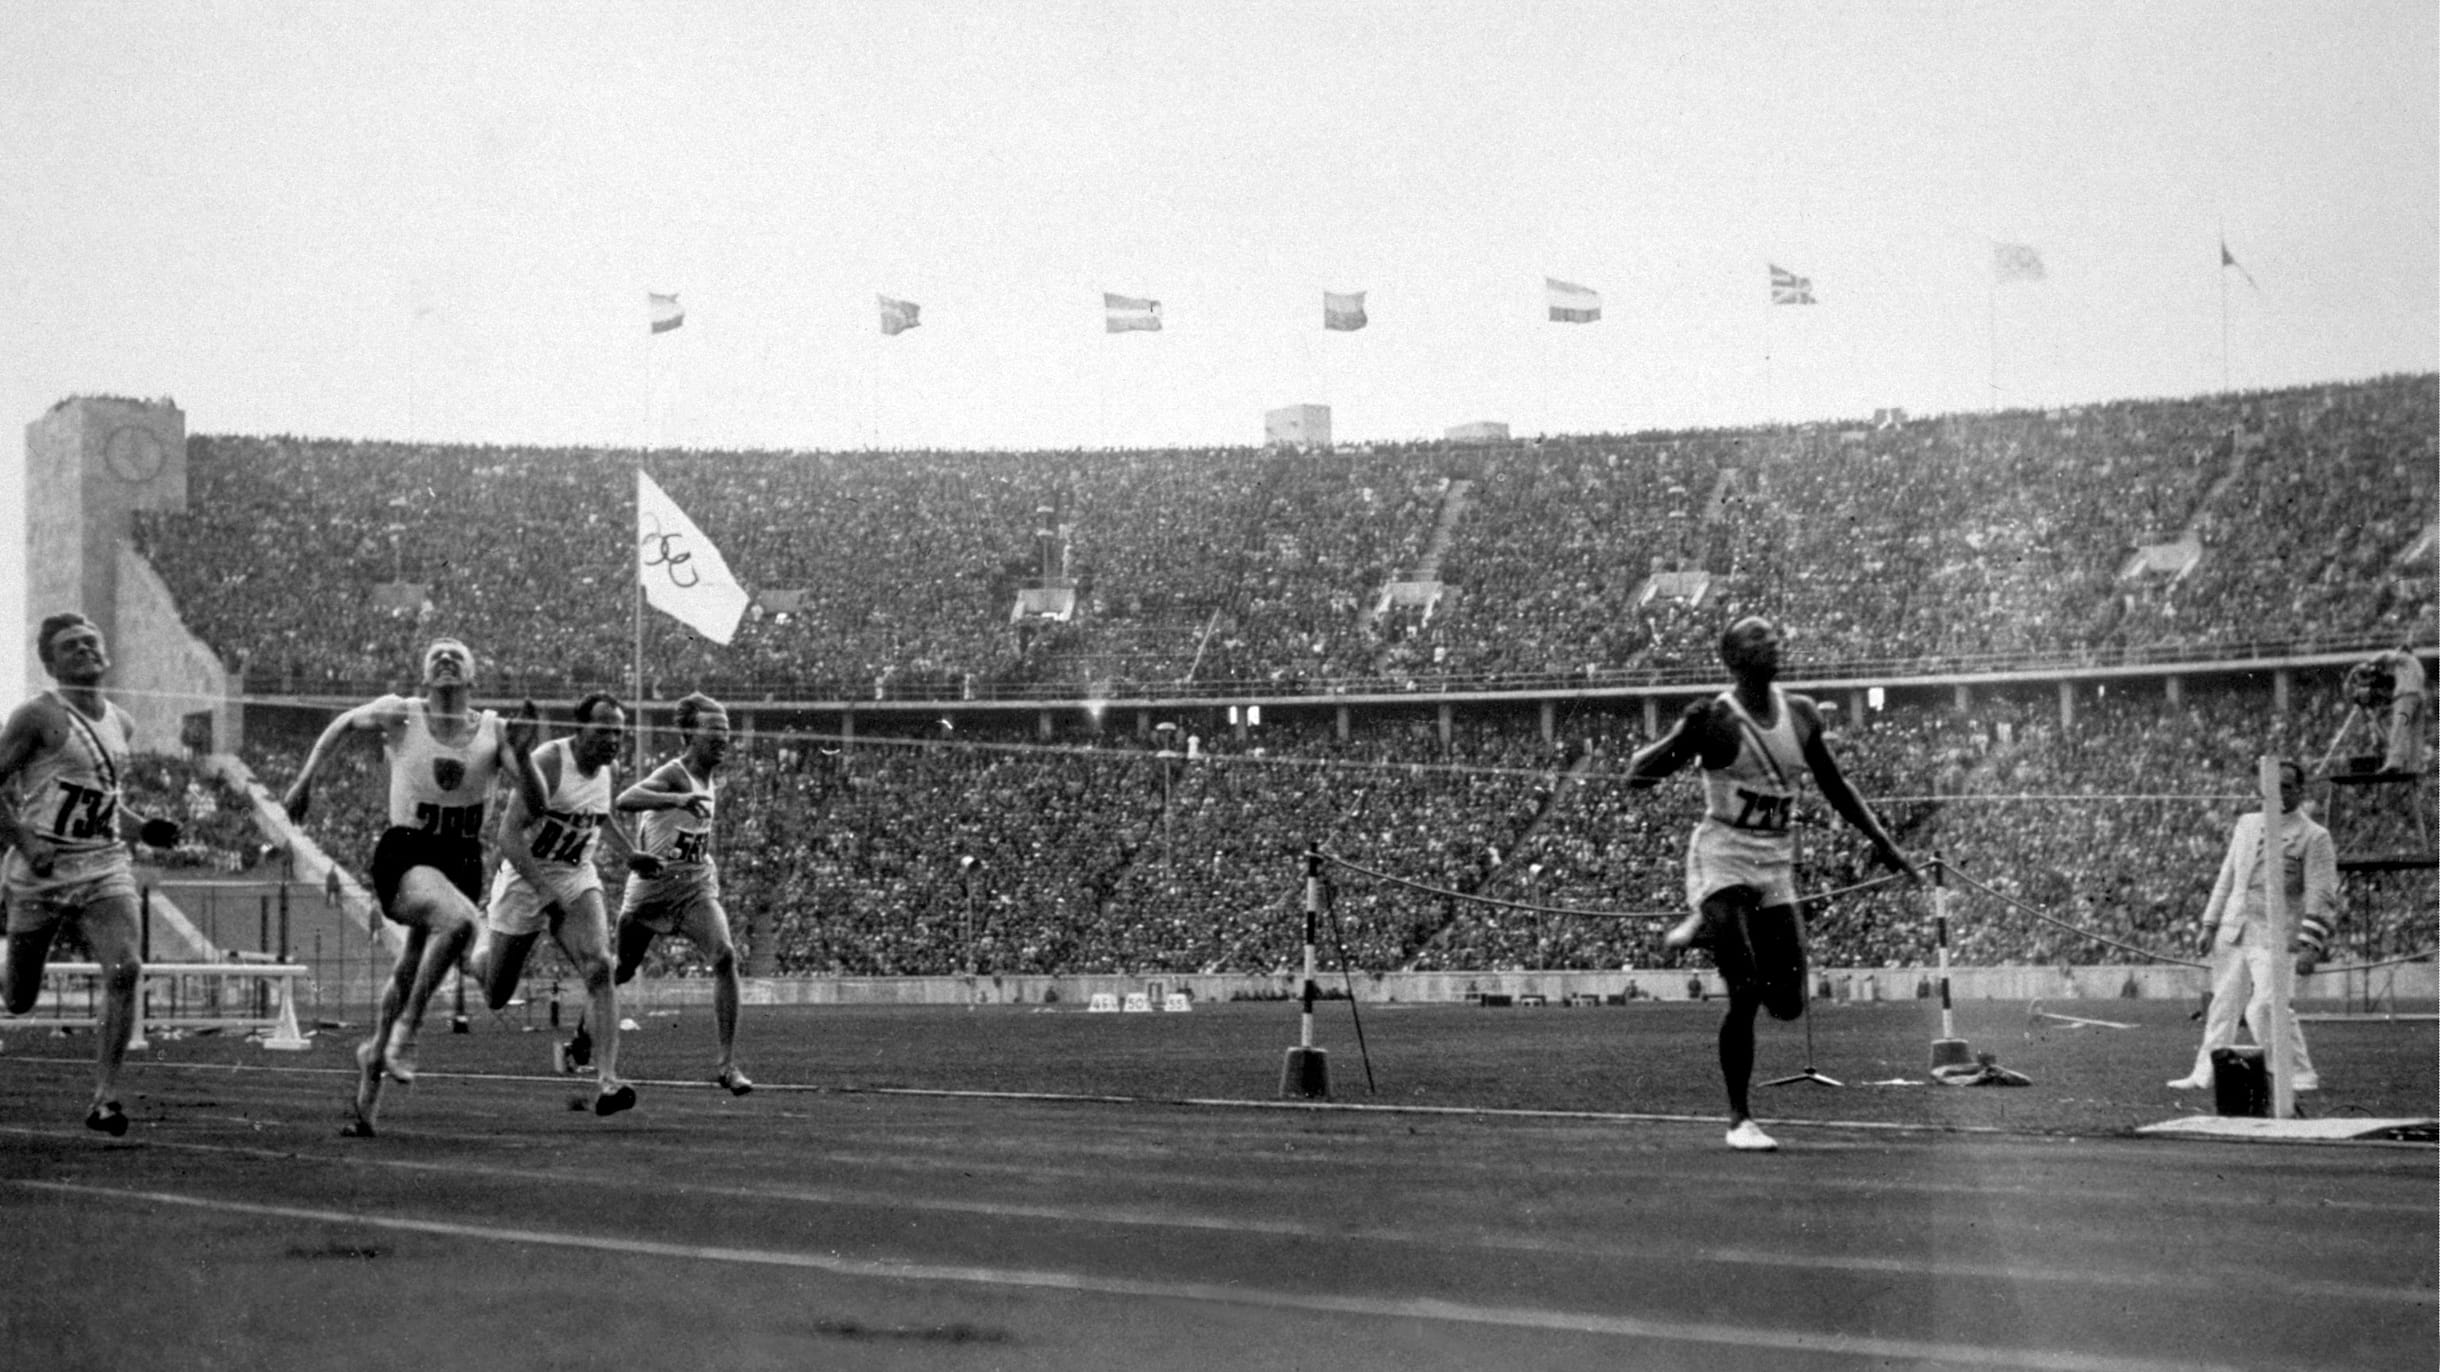 This week in Olympic sports history: March 25-31, Jesse Owens honoured